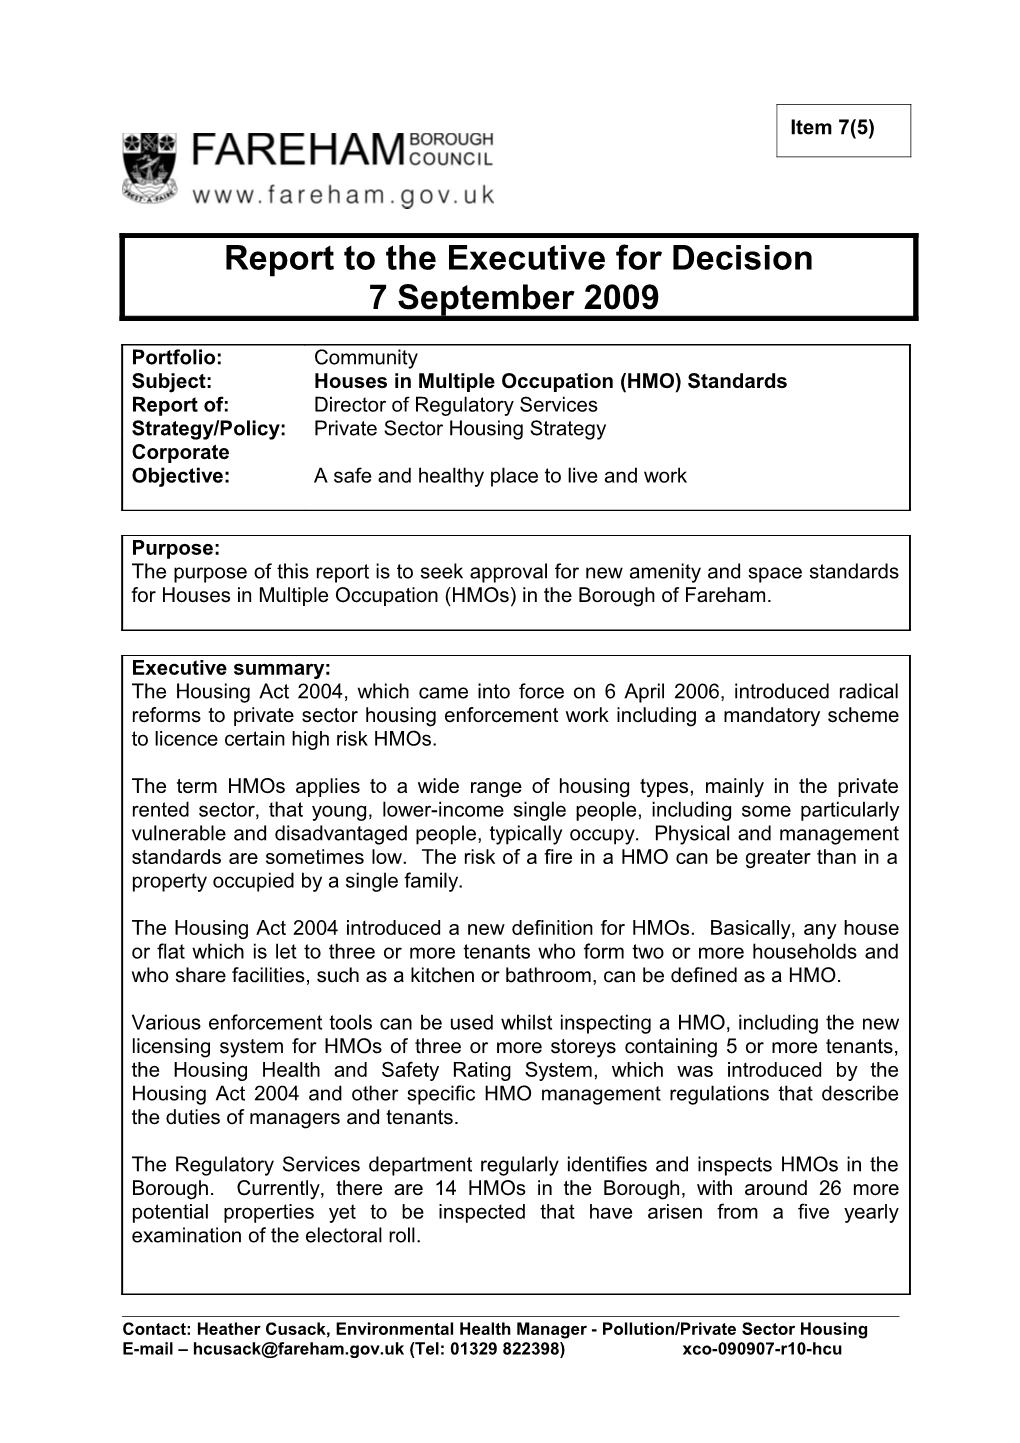 Report to the Executive for Decision - (Environmental Health Manager - Pollution/Private